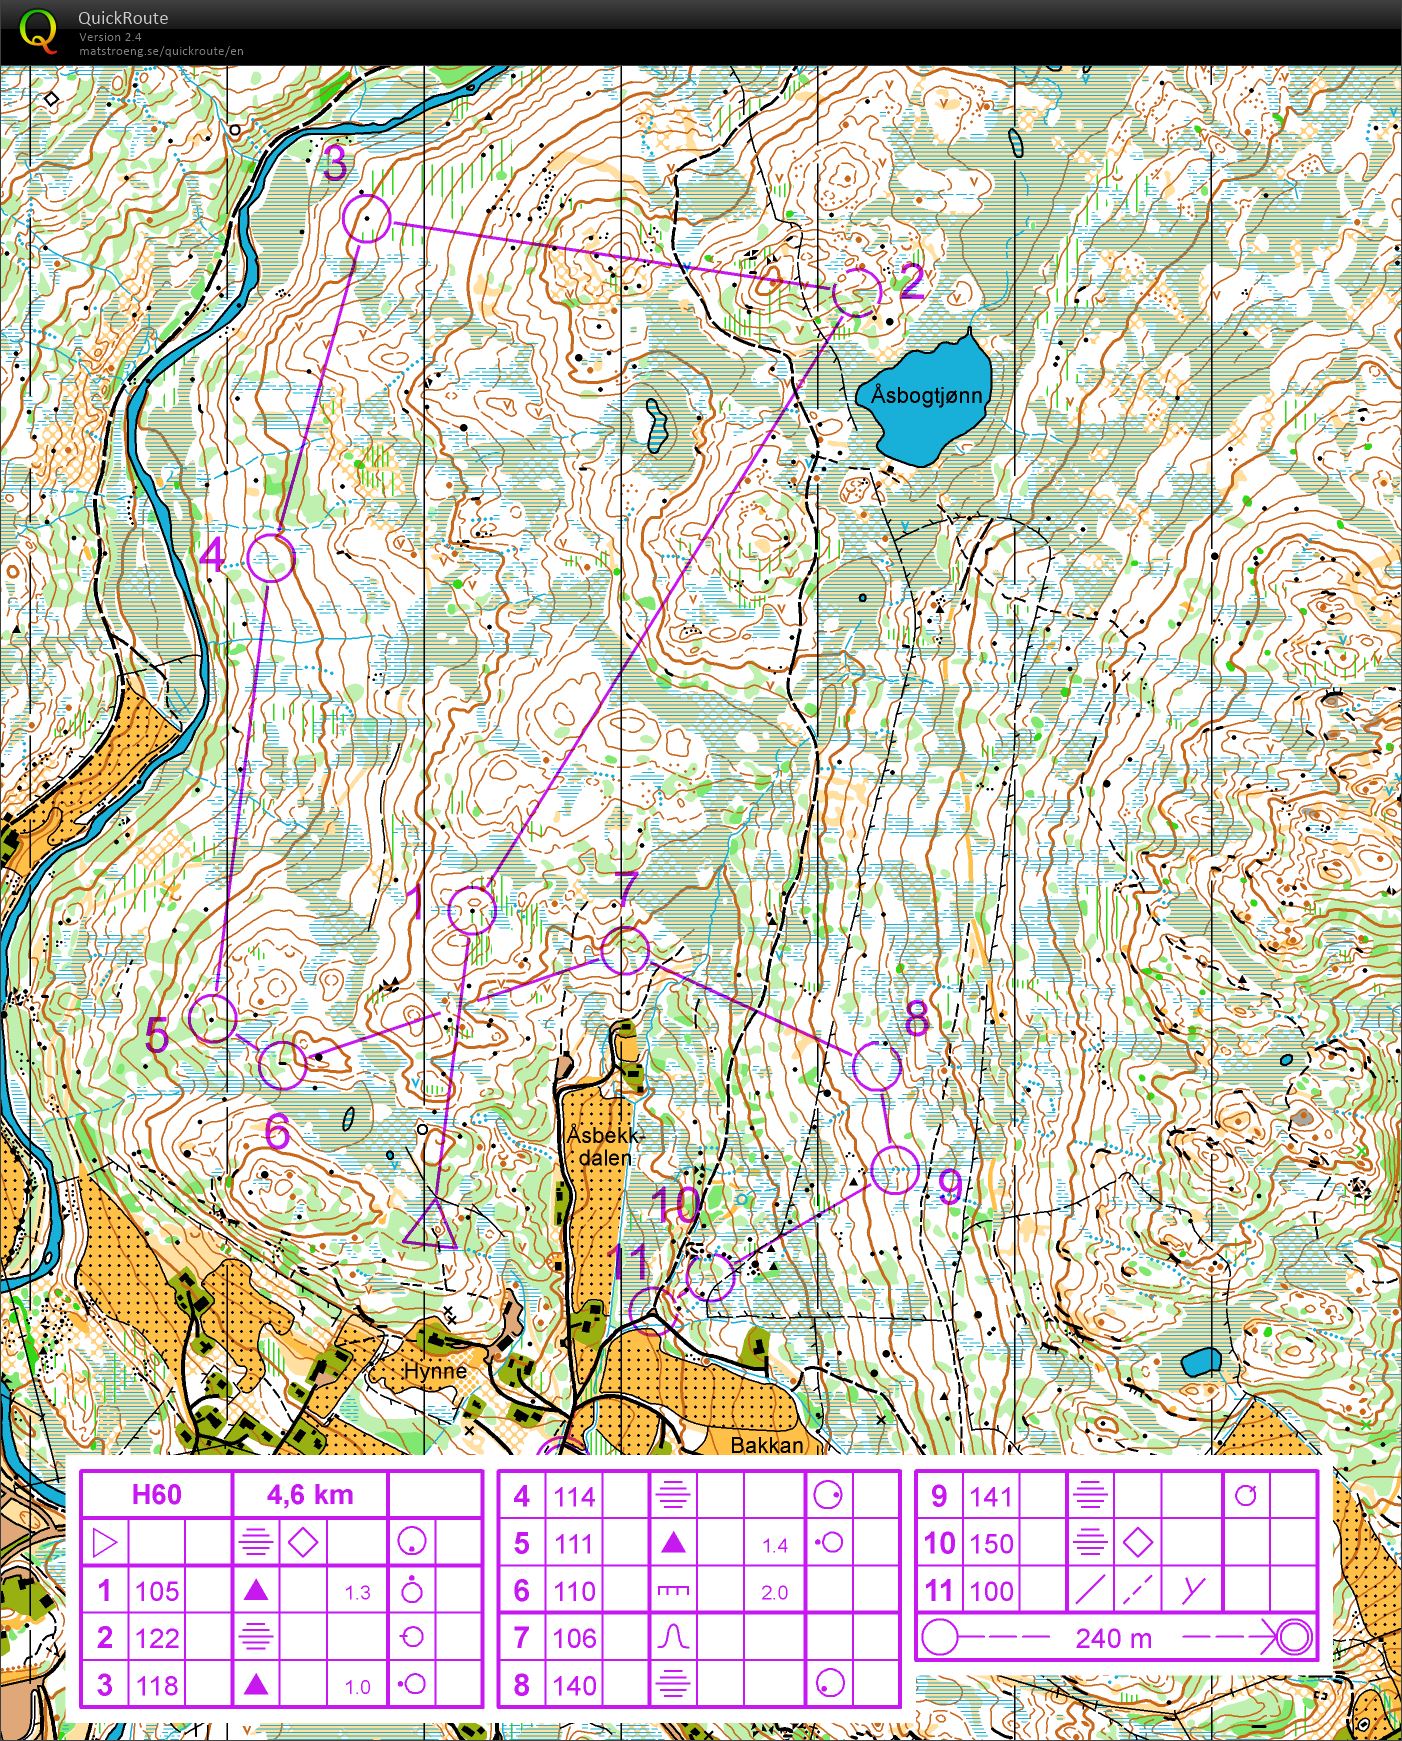 Re-run of H60 Long course from VM in Rauland (2017-10-12)